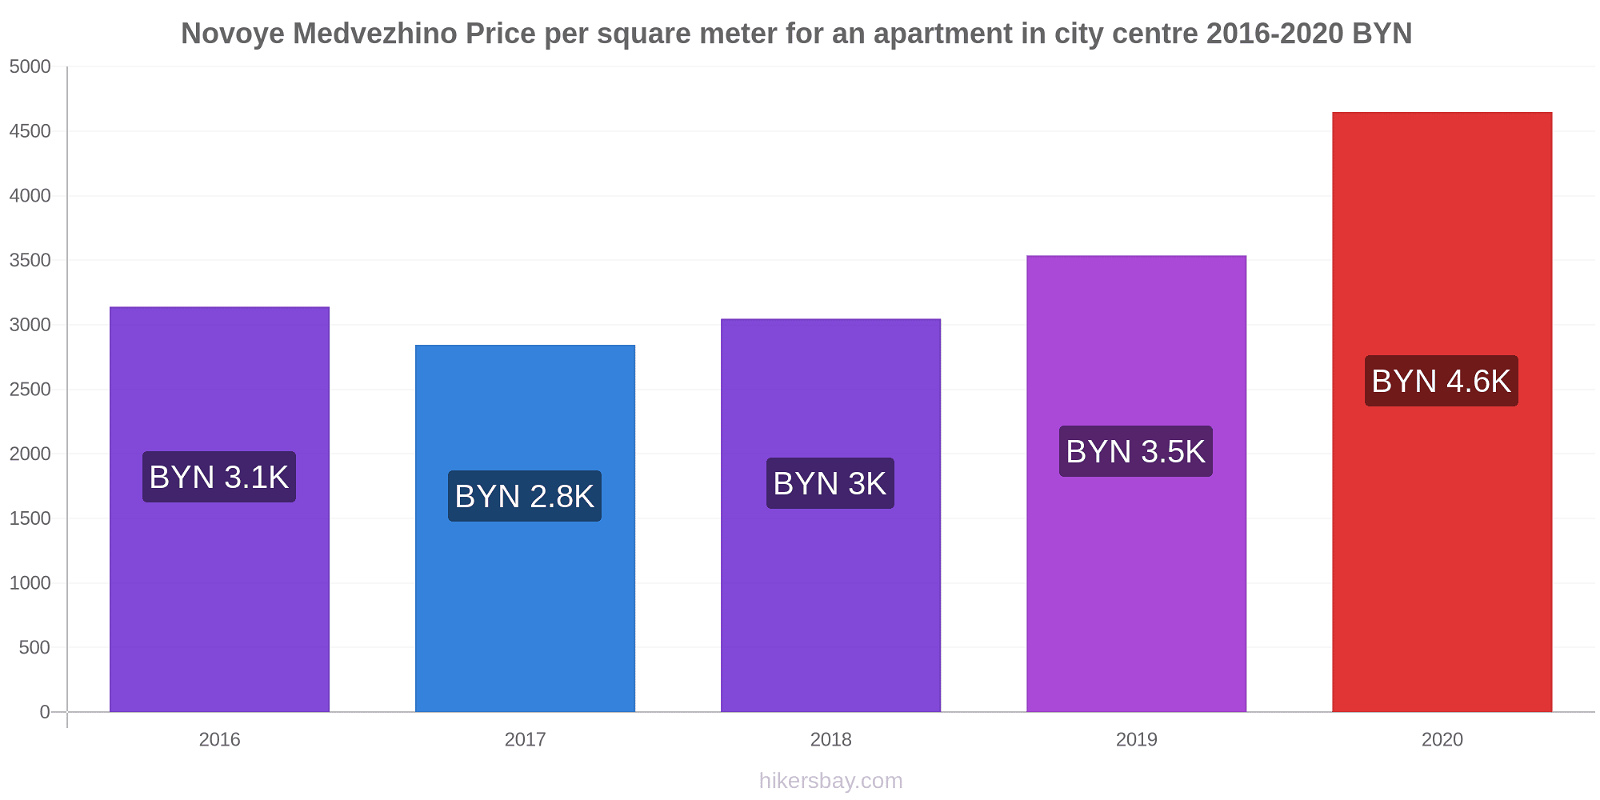 Novoye Medvezhino price changes Price per square meter for an apartment in city centre hikersbay.com